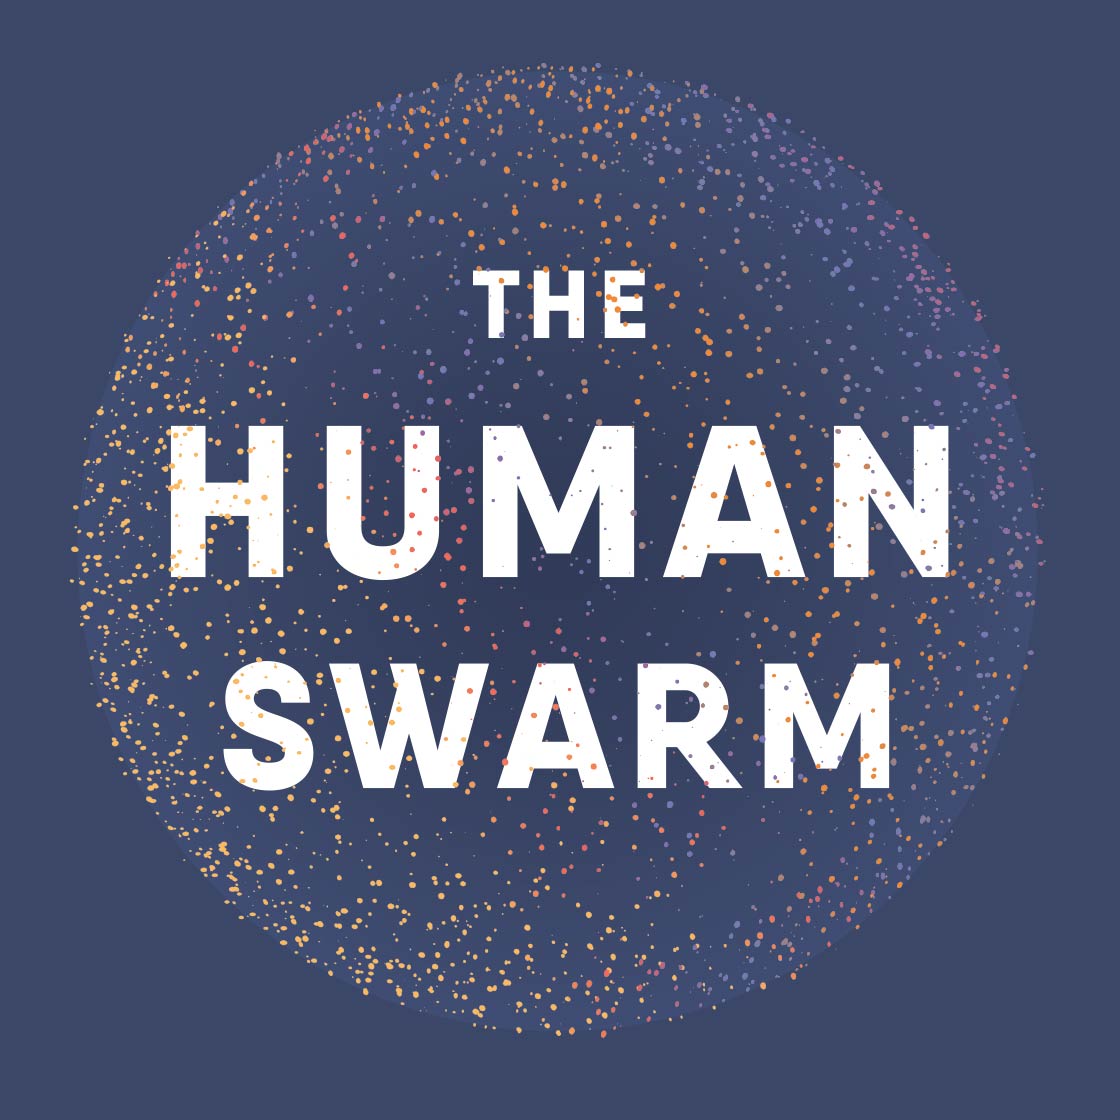 The Human Swarm: How Our Societies Arise, Thrive, and Fall